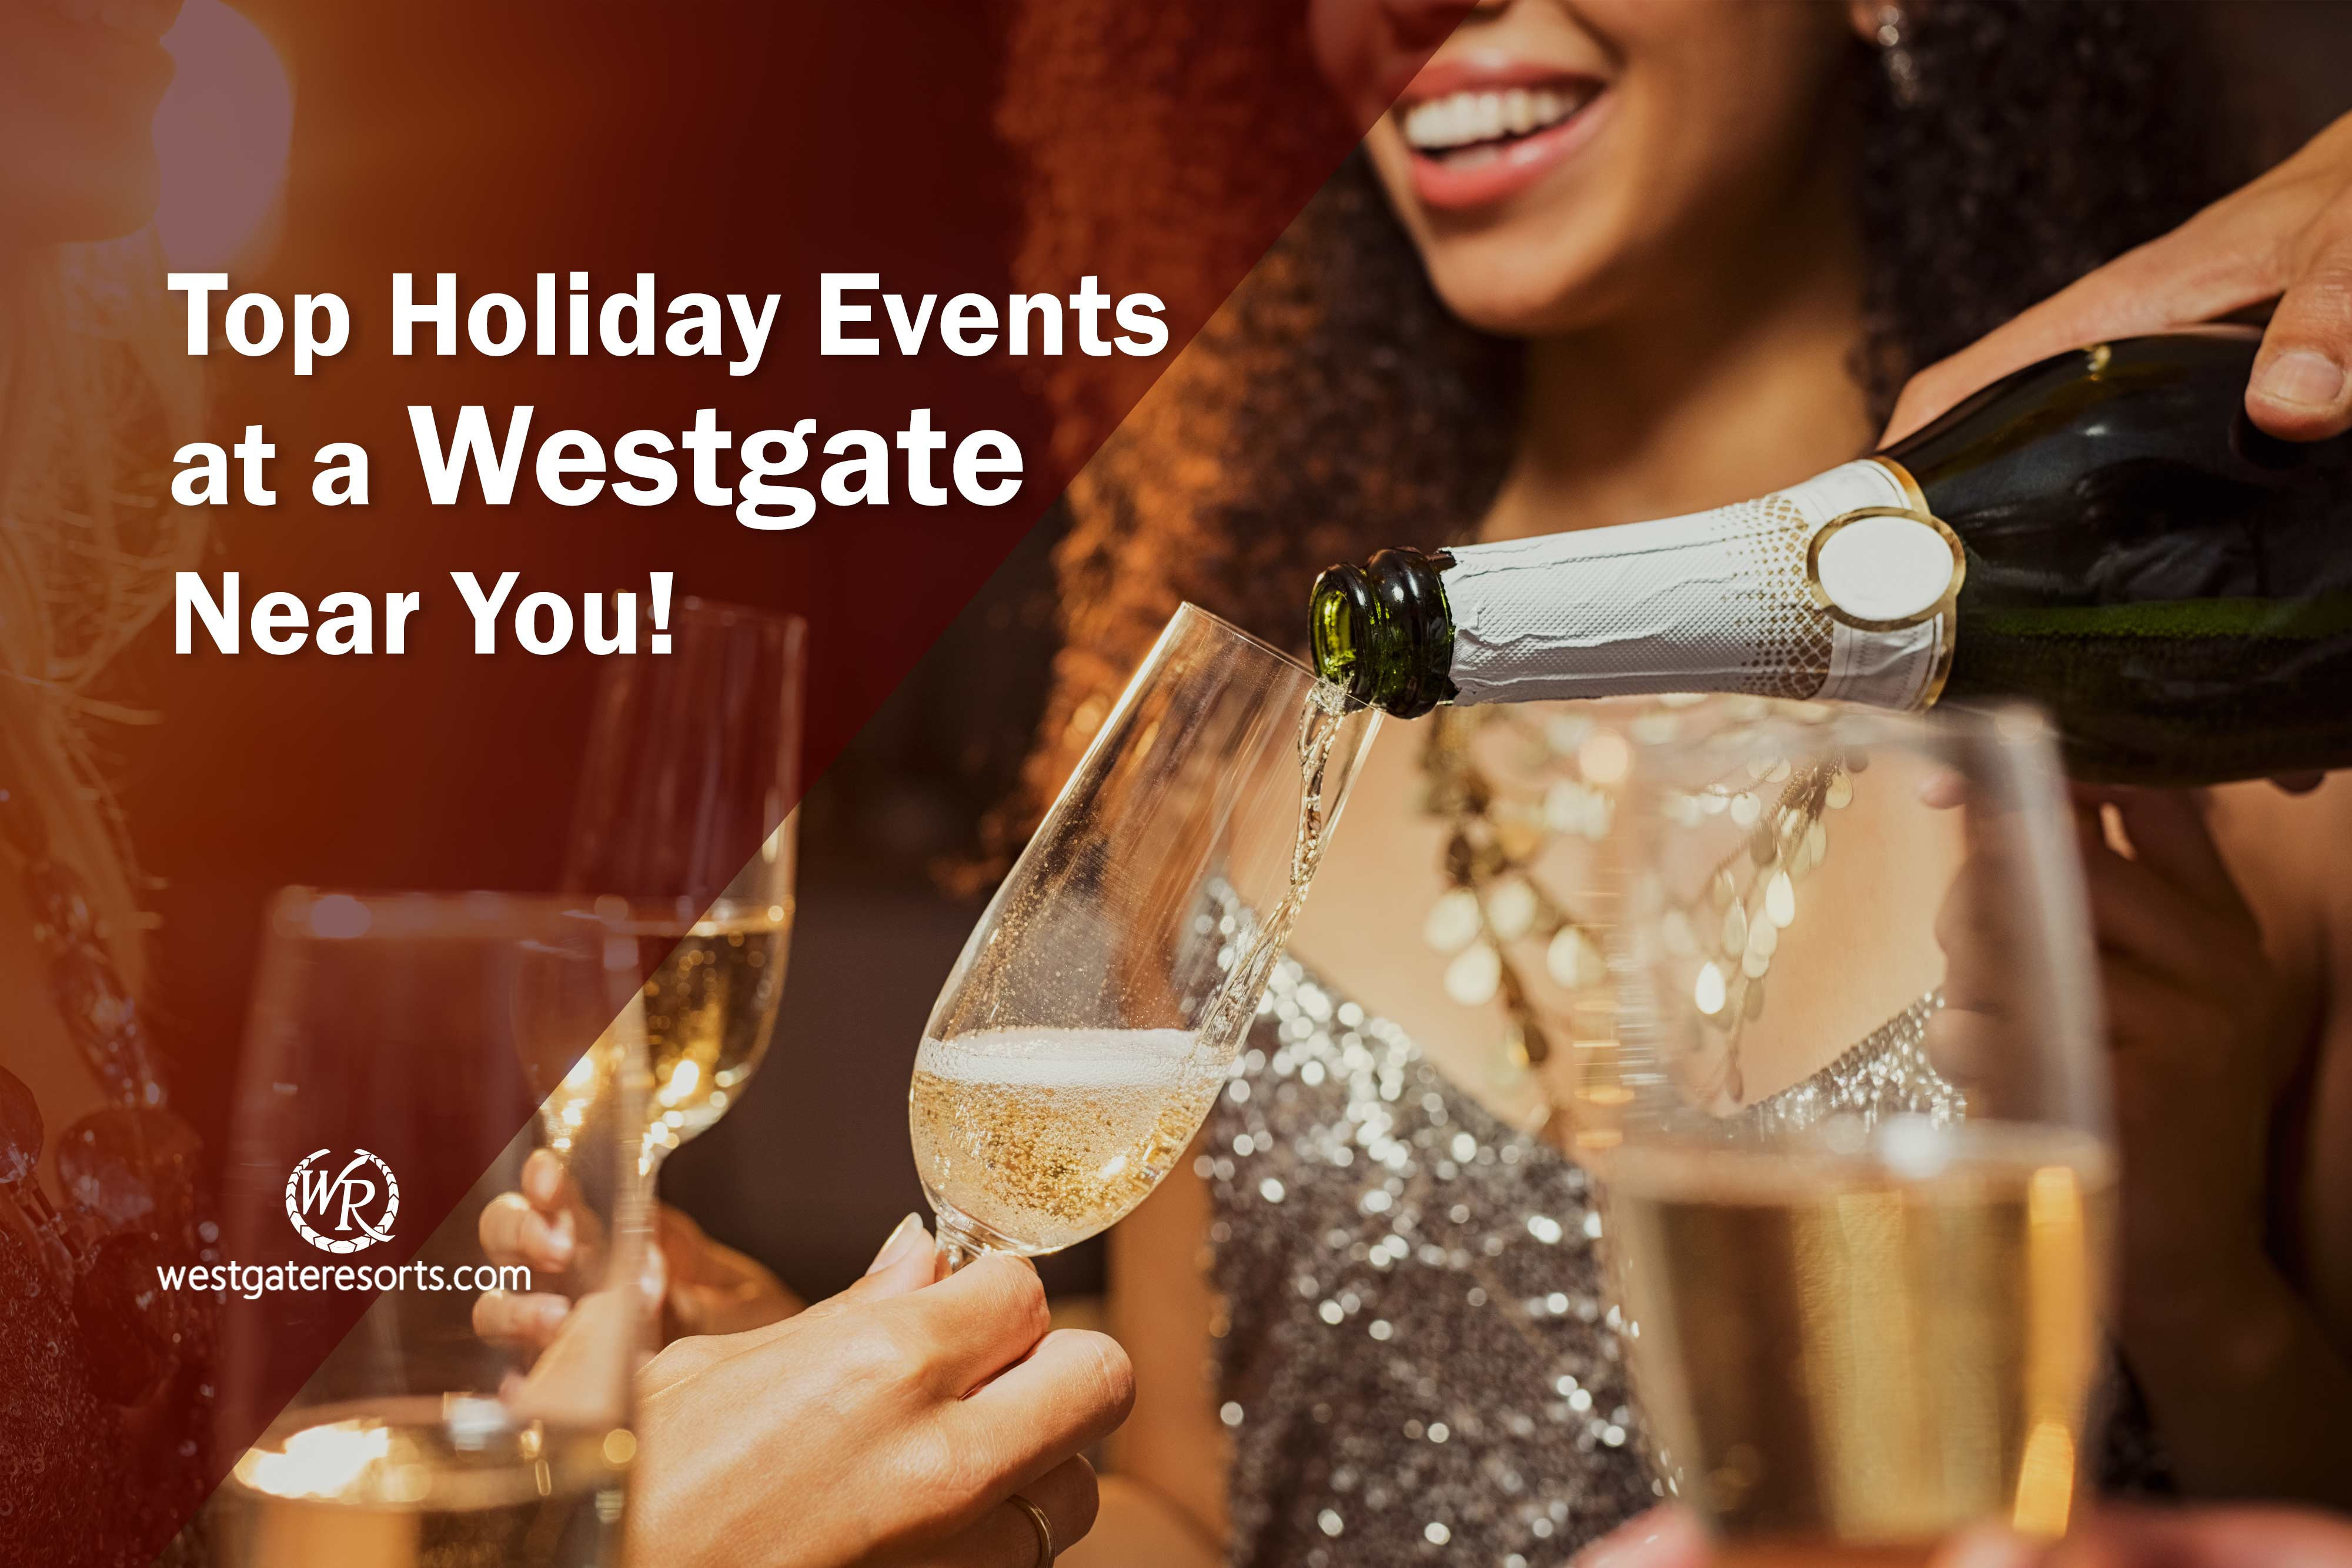 Top Holiday Events at a Westgate Near You!